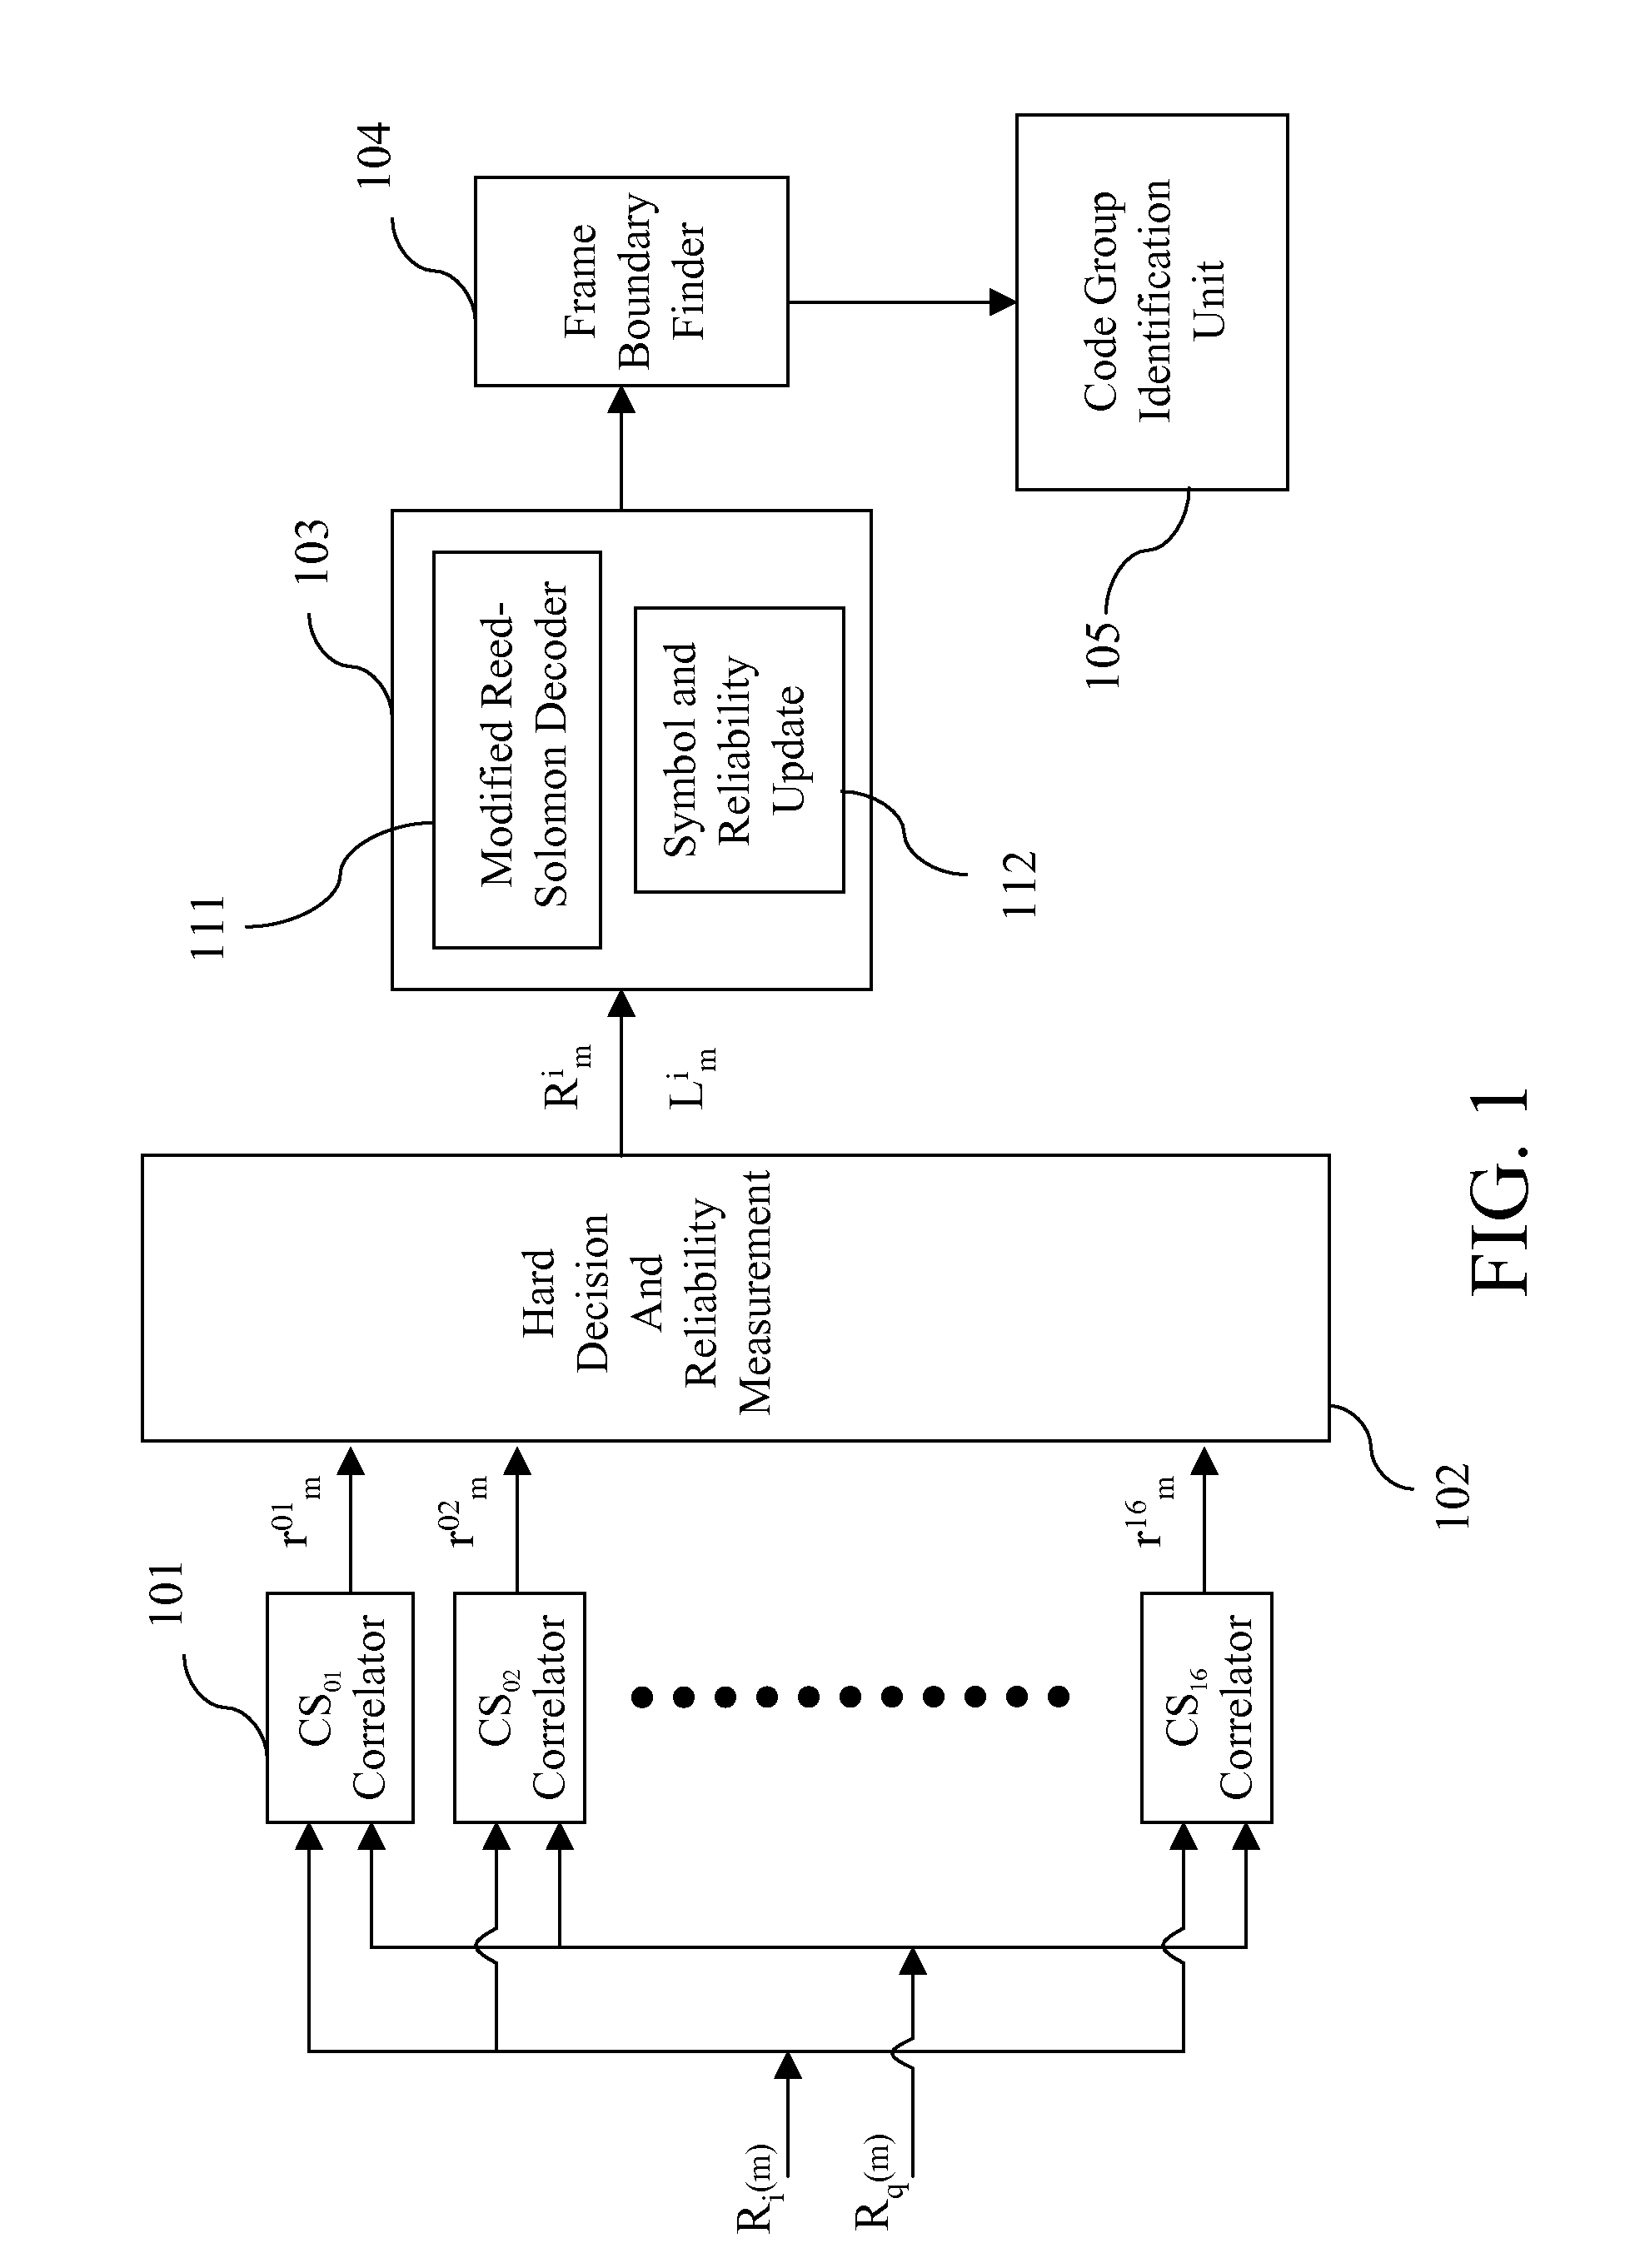 Method And Apparatus For Code Group Identification And Frame Synchronization By Use Of Reed-Solomon Decoder And Reliability Measurement For UMTS W-CDMA